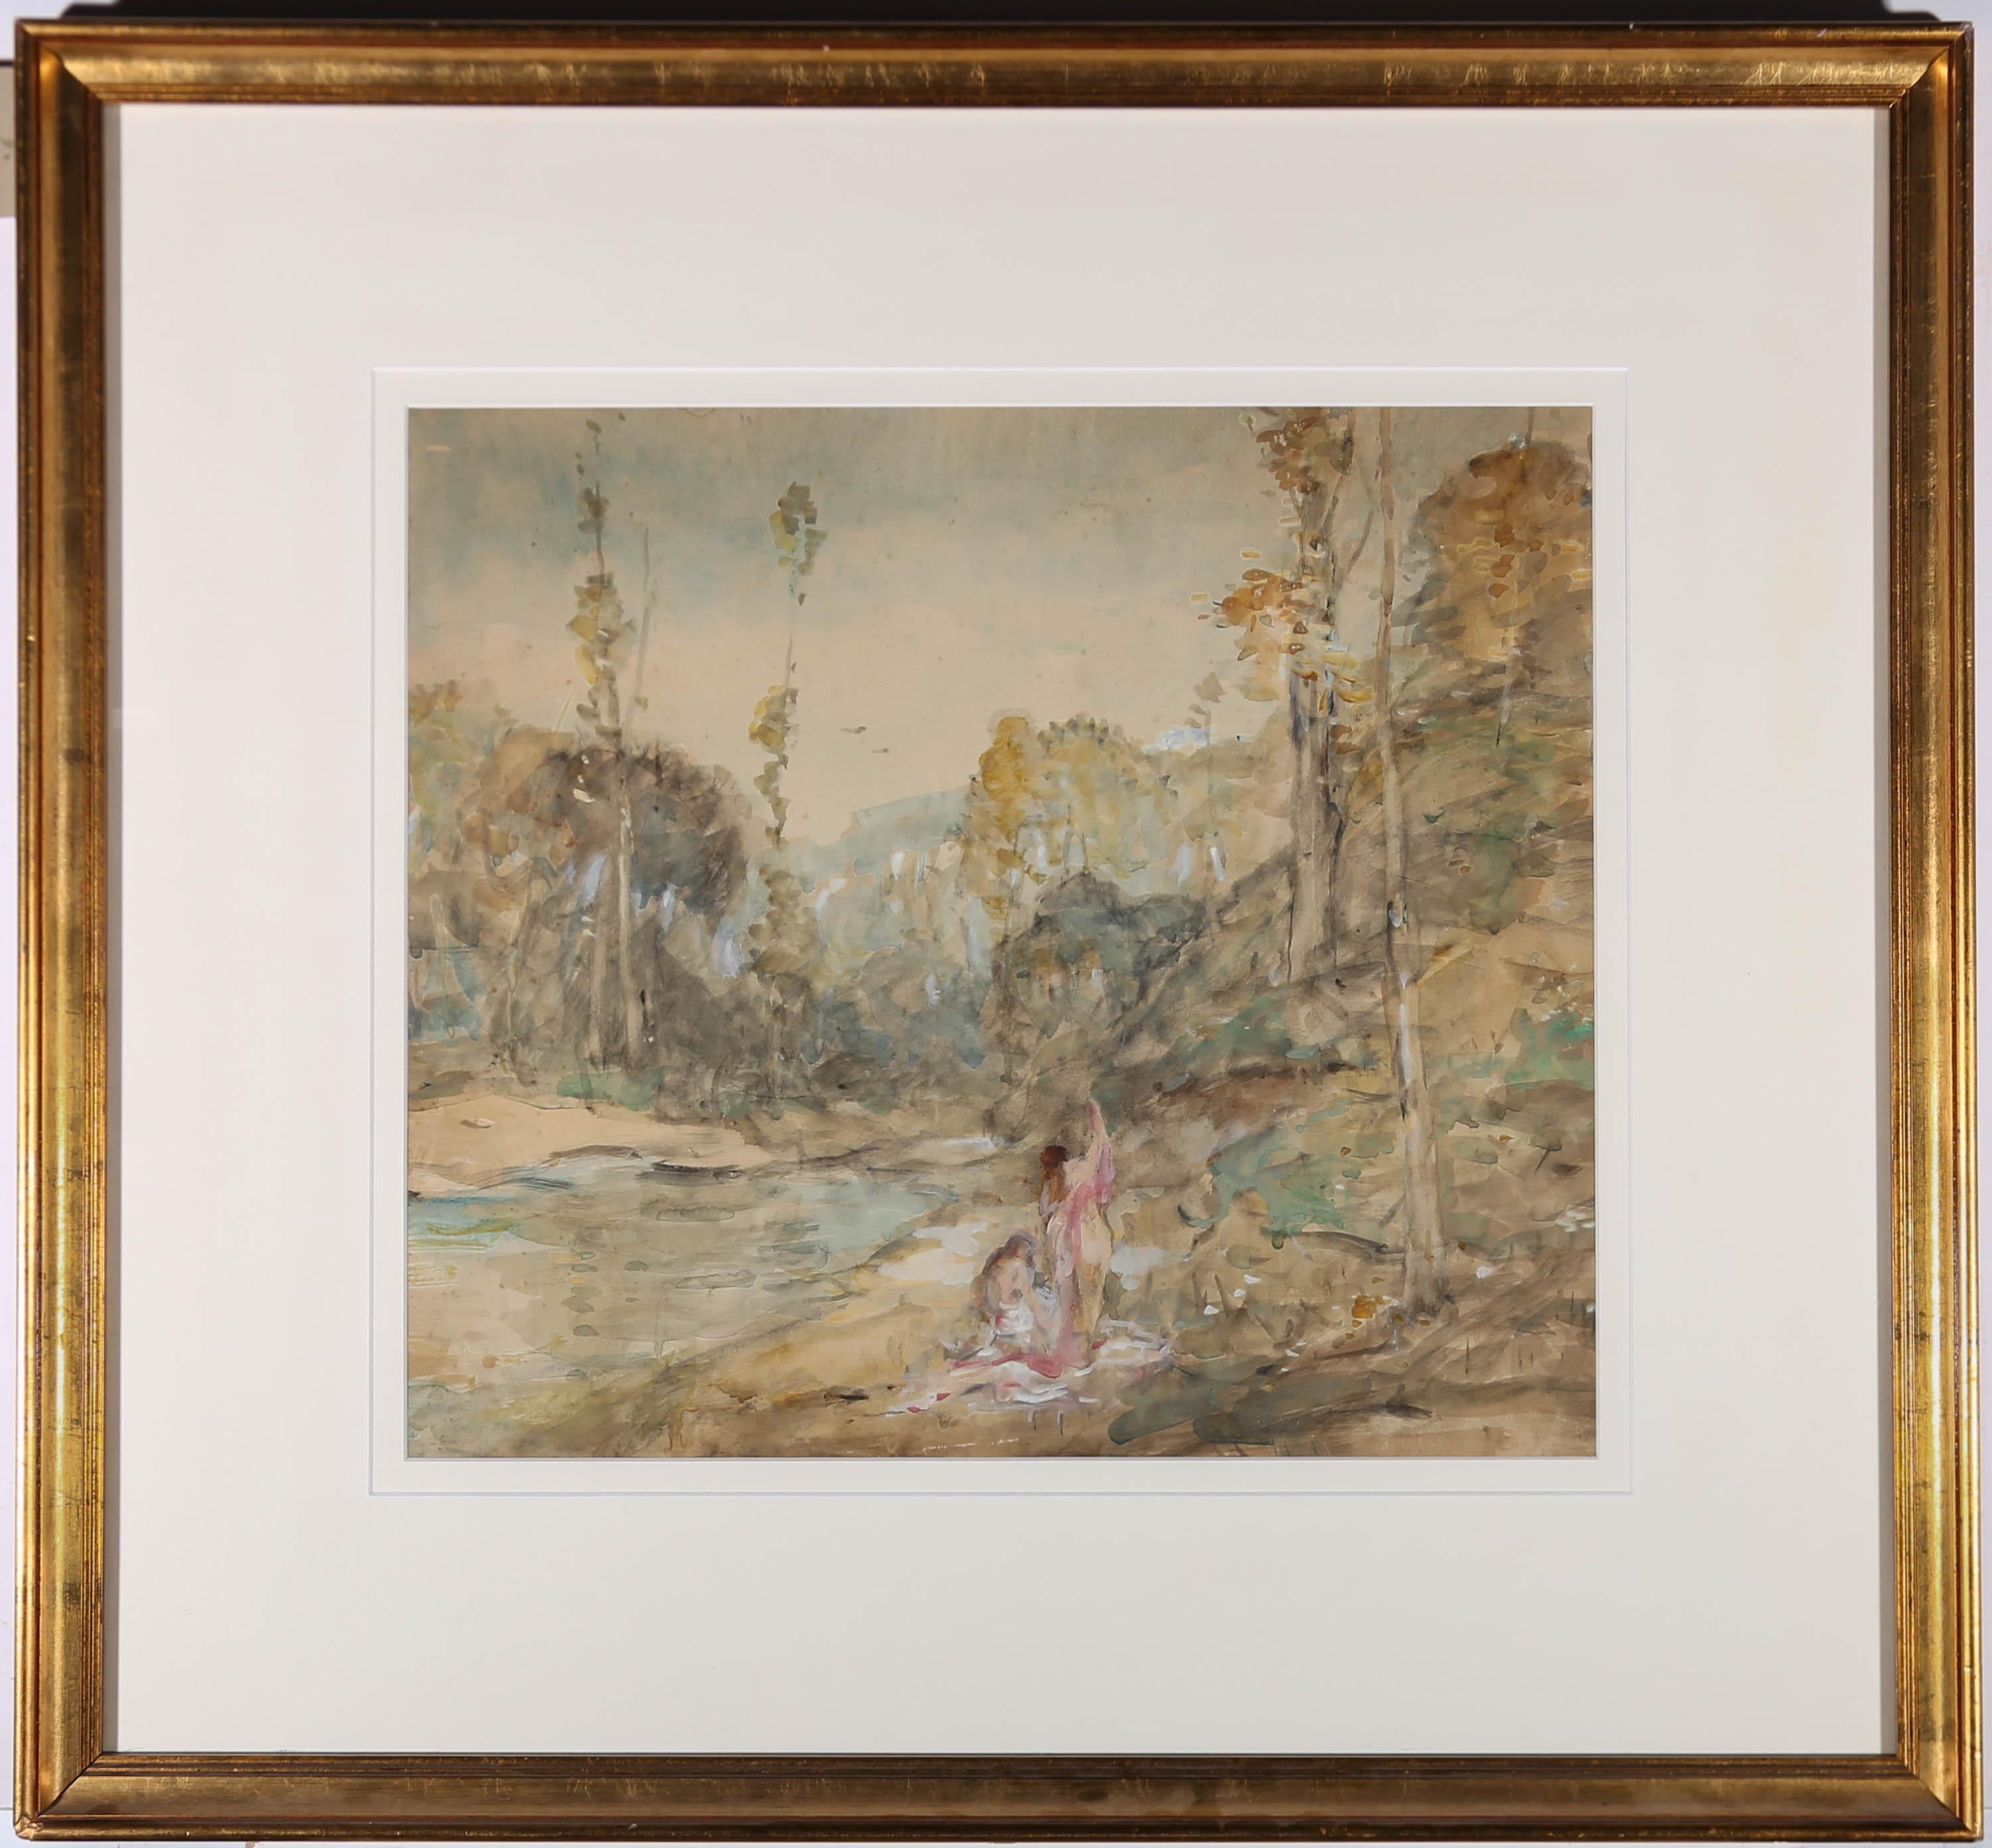 This fine early 20th Century watercolour sketch was one of the artist's preparatory sketches for his finished painting, "Eventide." It shows to nude figures, drying themselves beside a lake on a calm evening. This fine sketch shows an excellent eye